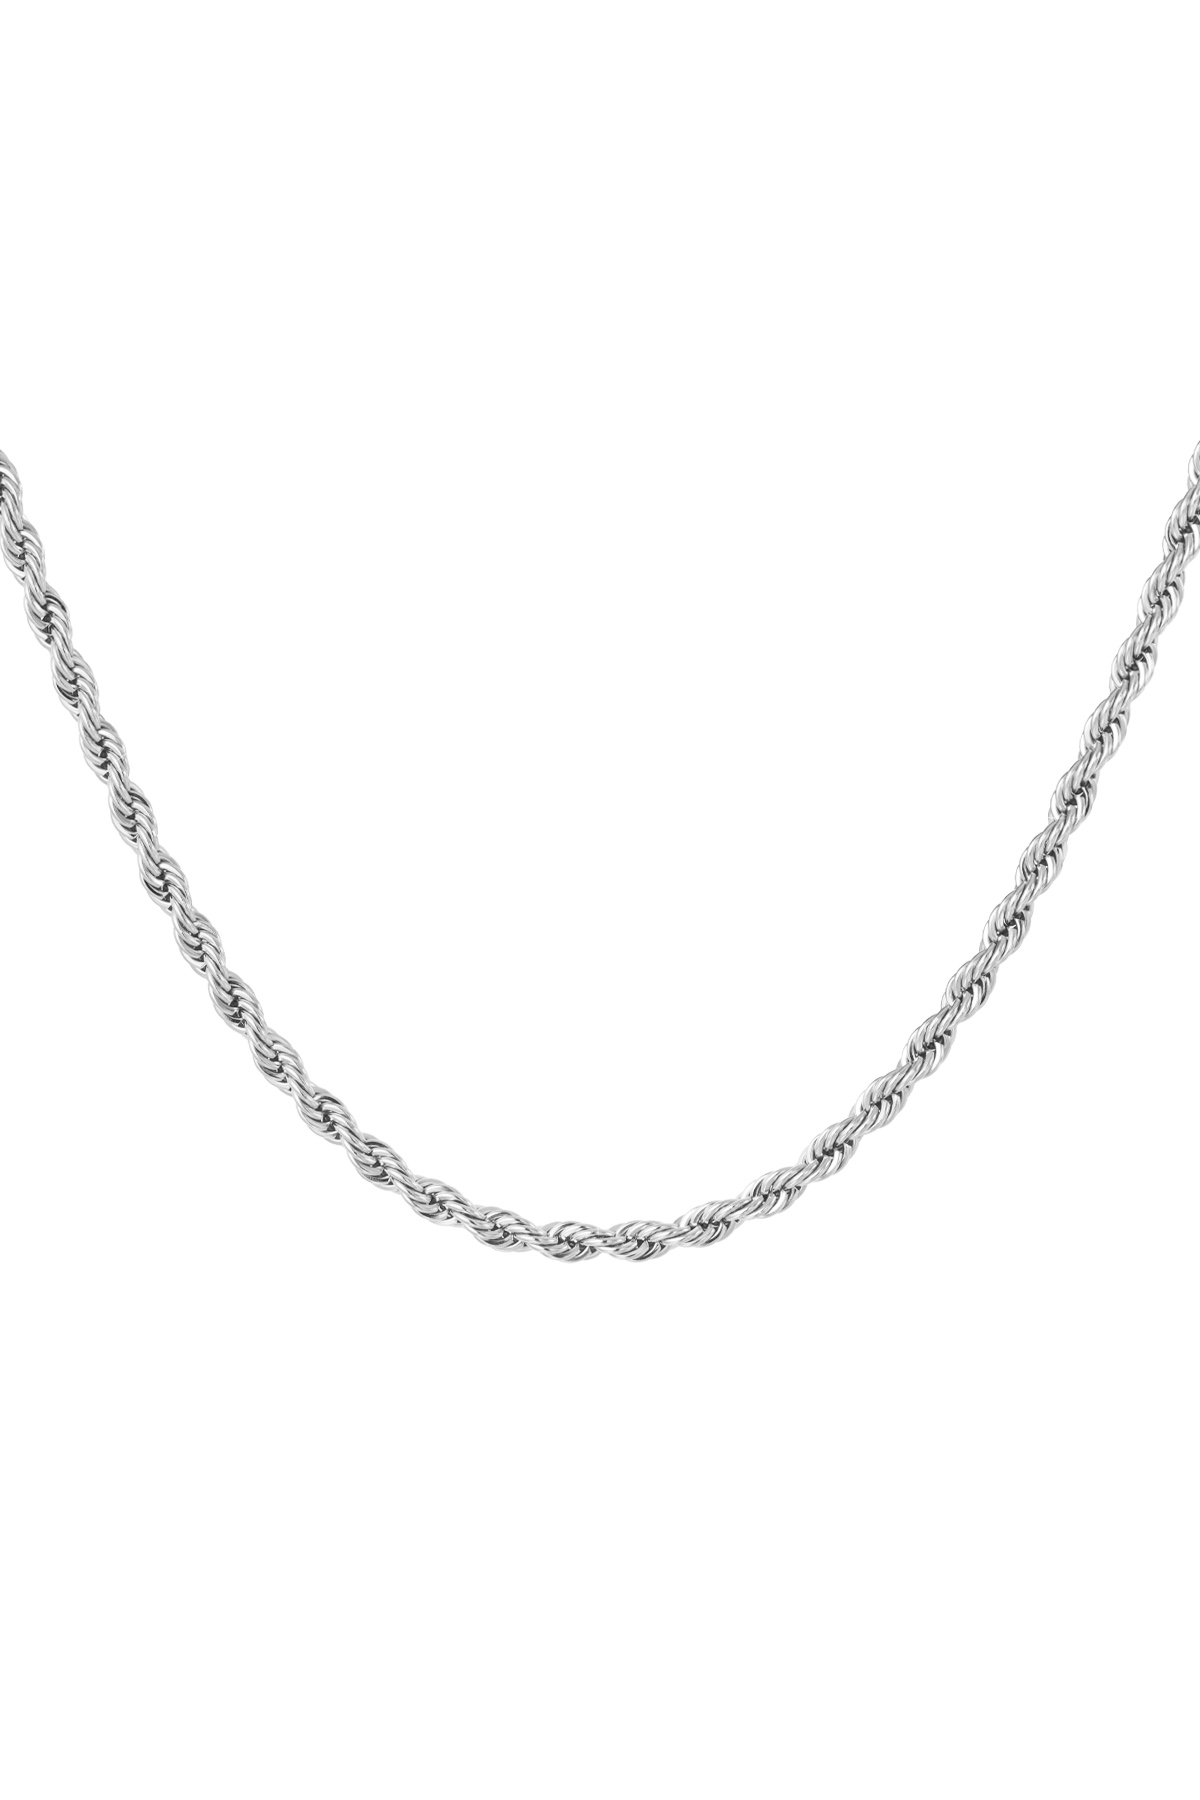 Unisex necklace twisted - silver - 4.5MM